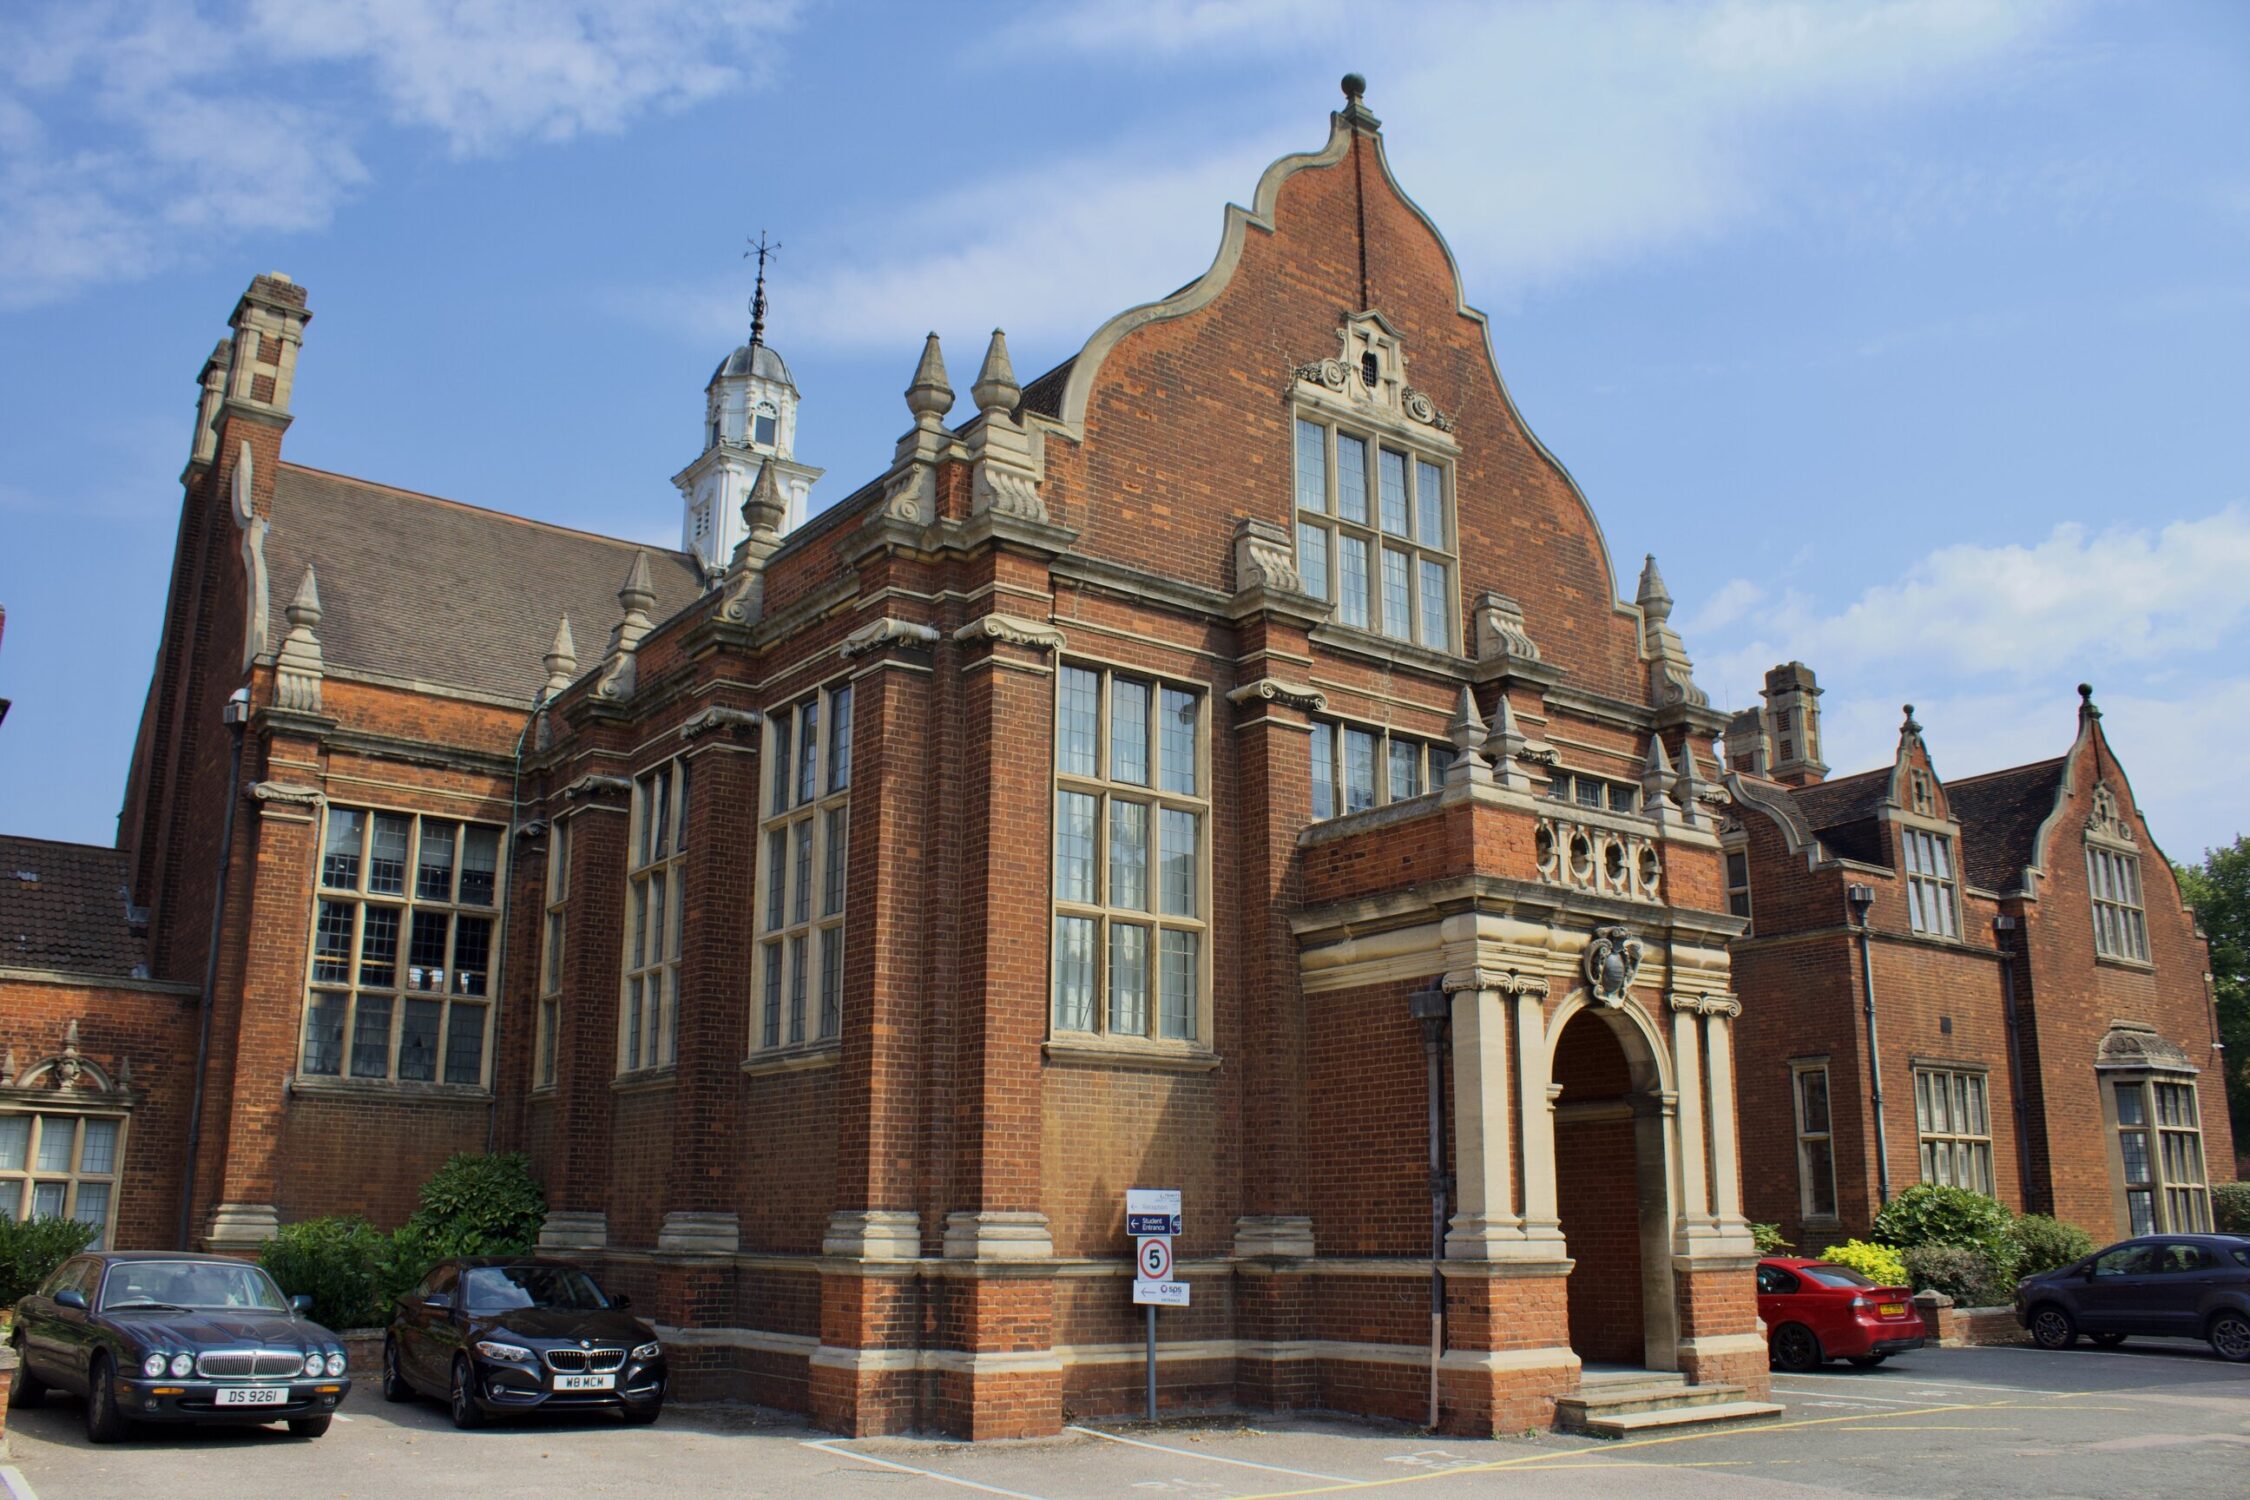 The Bedford Sixth Form Grand Hall